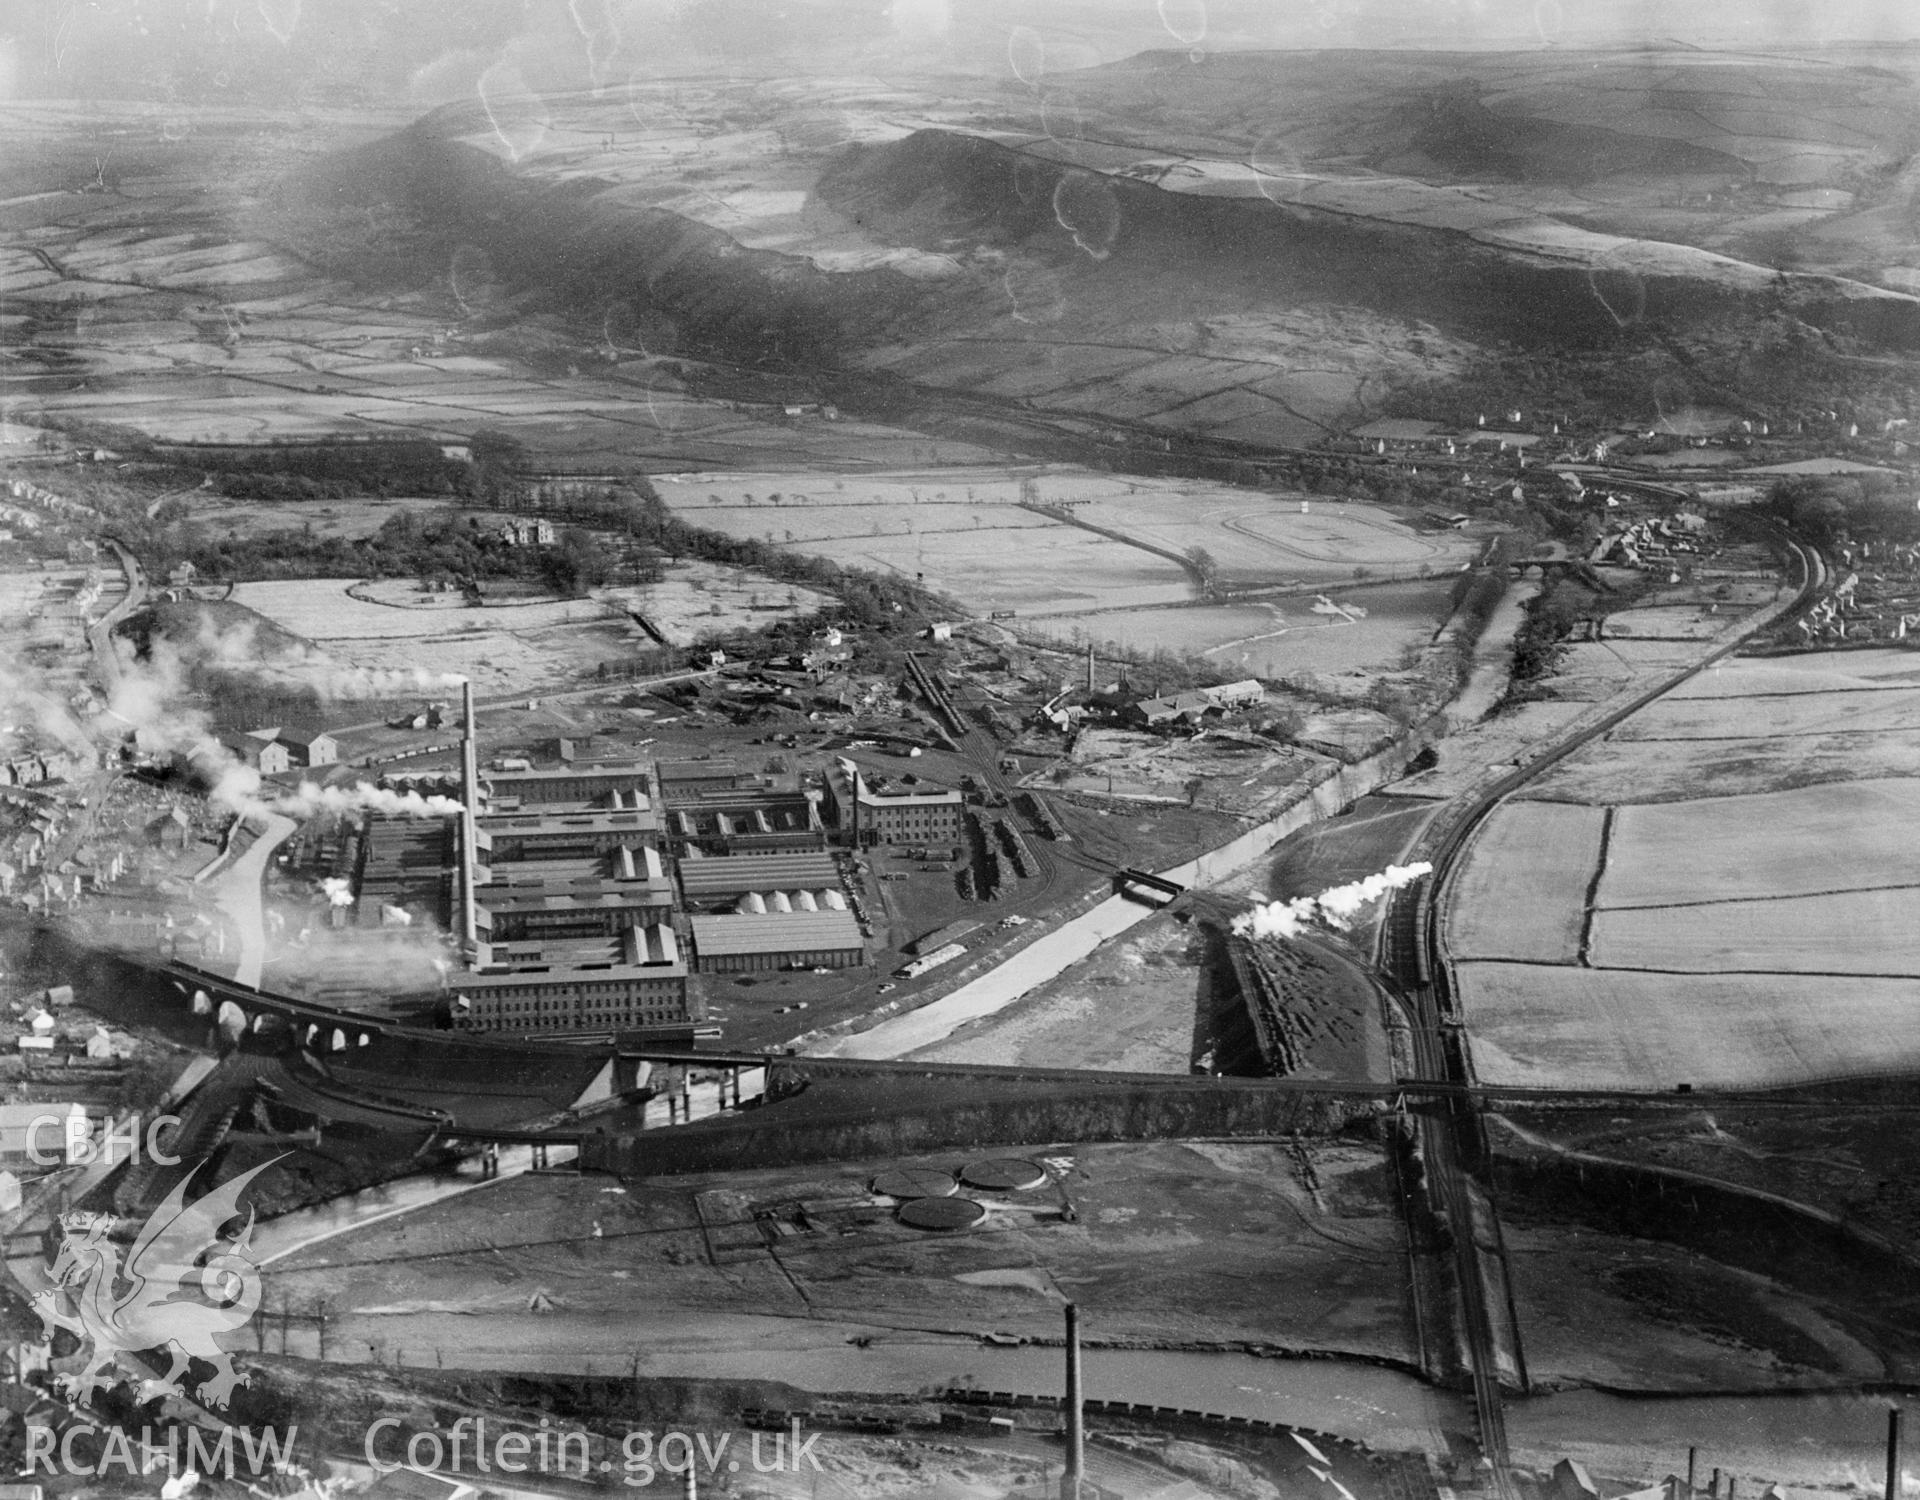 General view of Mond Nickel Works, Clydach, Swansea, oblique aerial view. 5?x4? black and white glass plate negative.